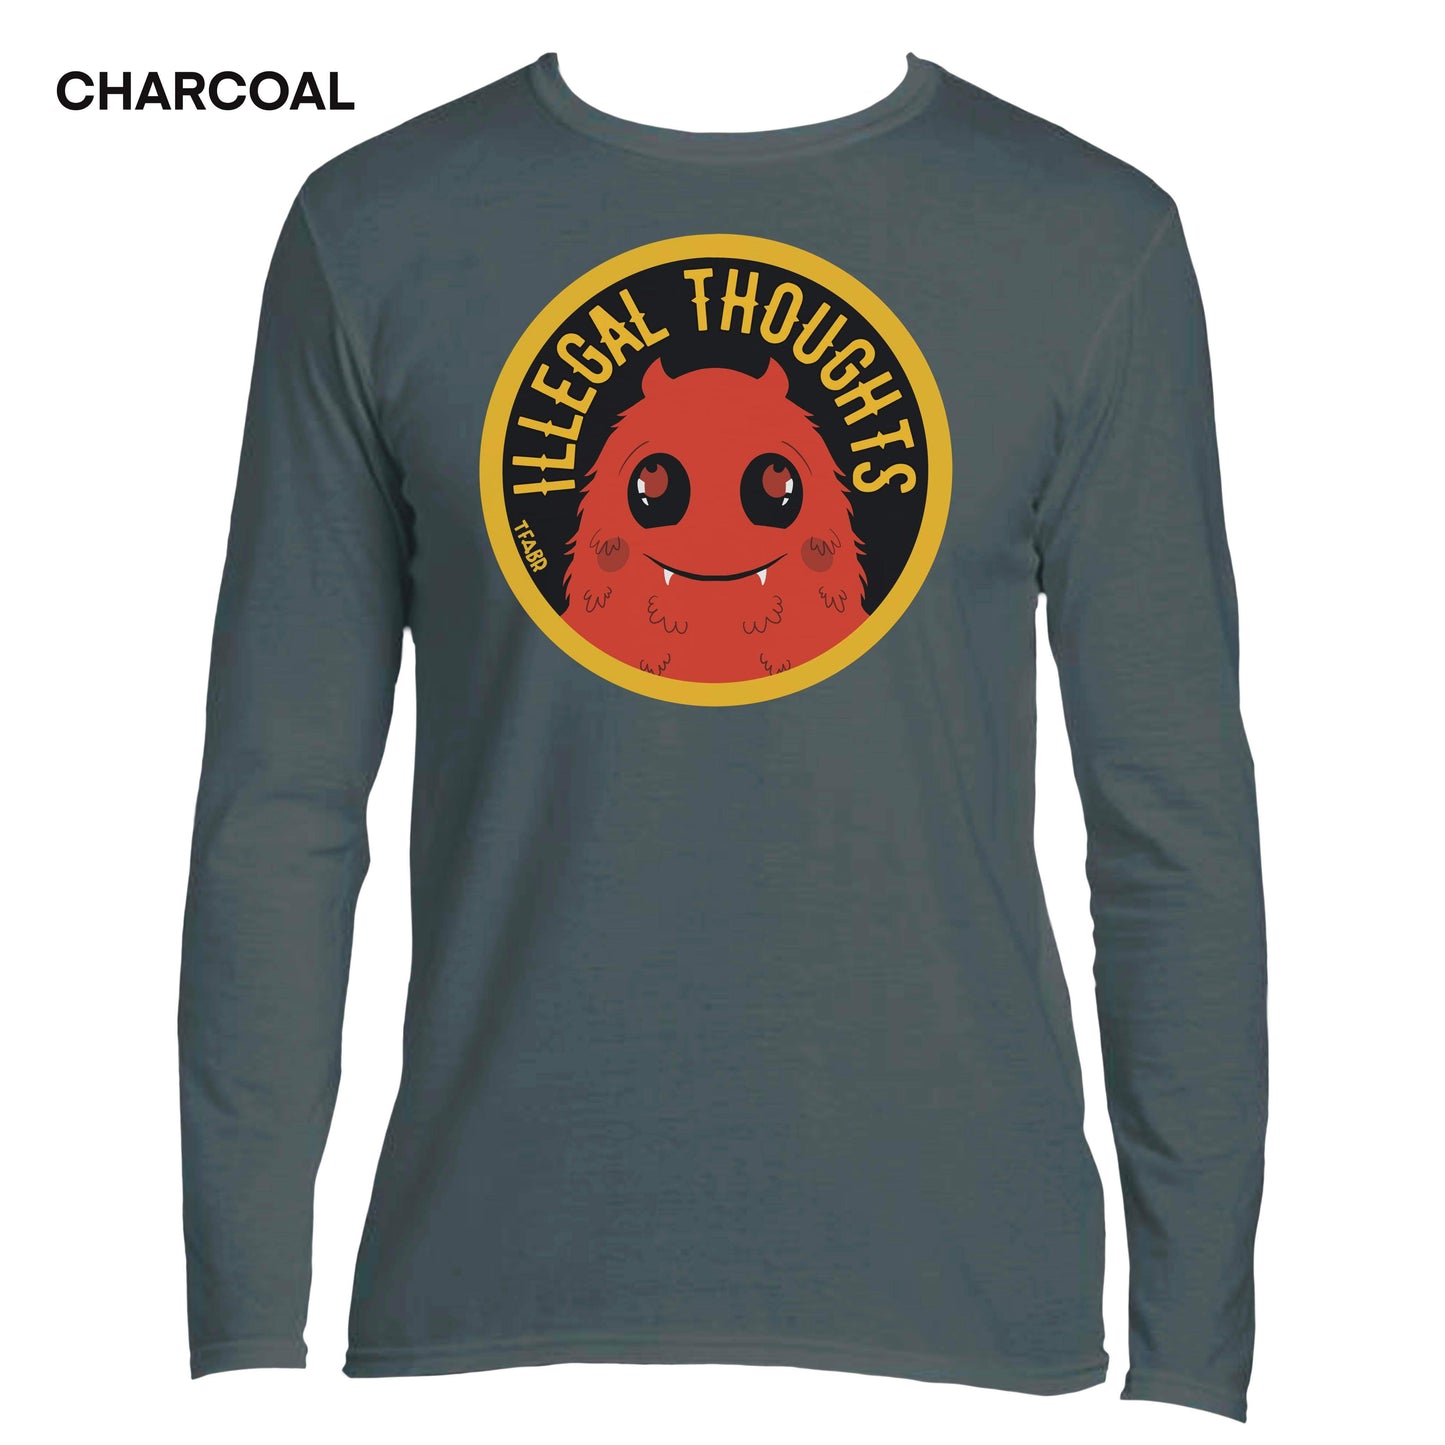 Illegal Thoughts! Men’s LongSleeve Tee